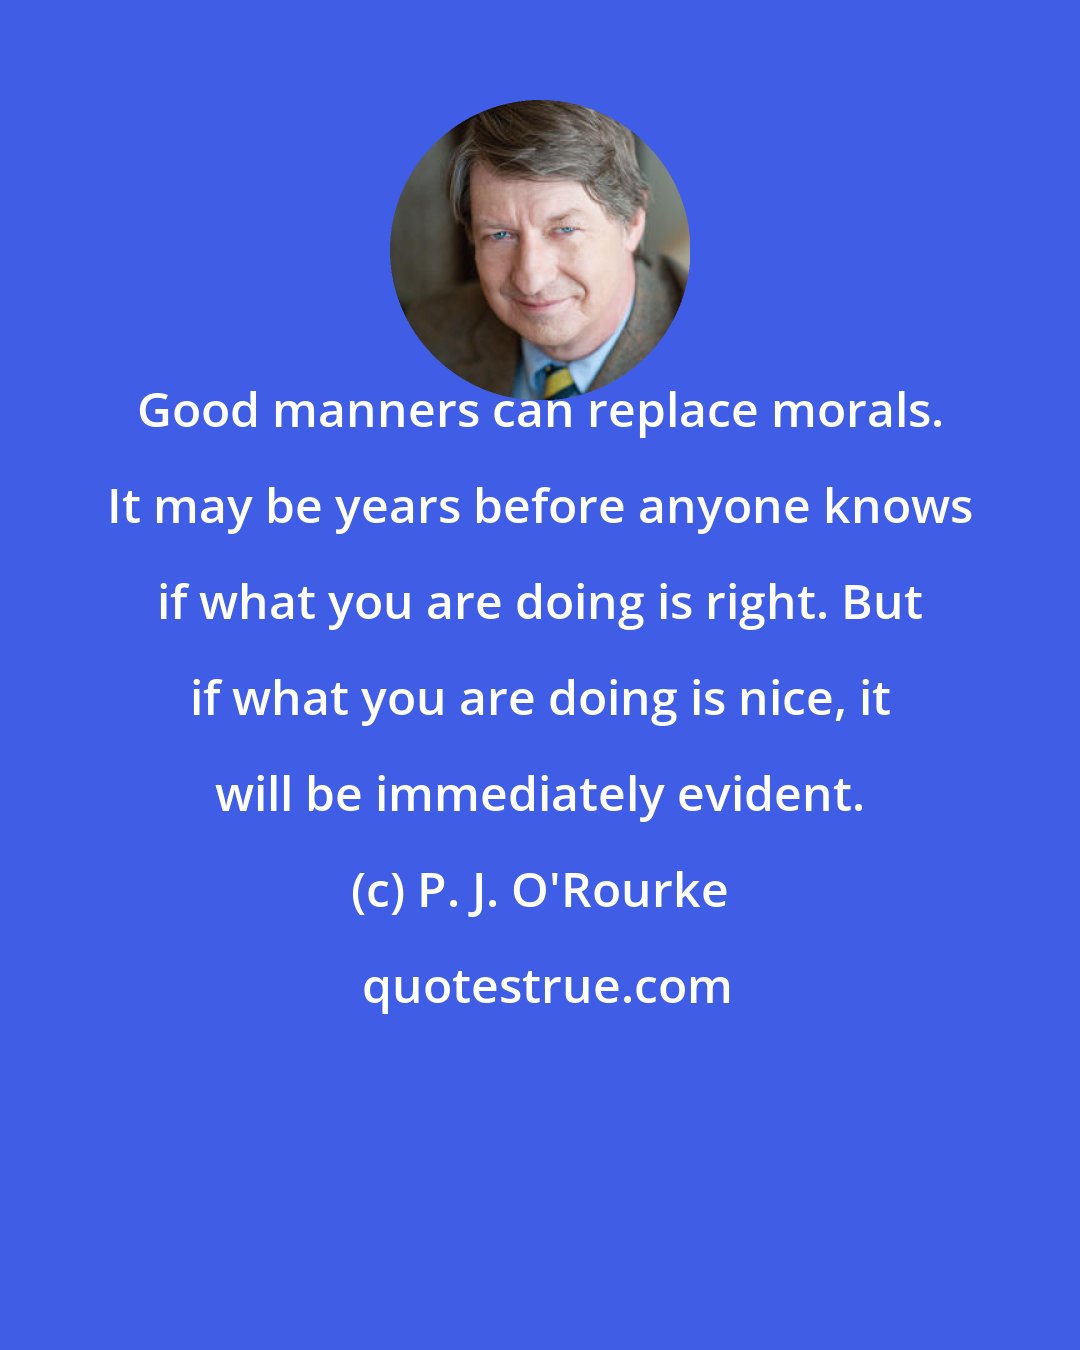 P. J. O'Rourke: Good manners can replace morals. It may be years before anyone knows if what you are doing is right. But if what you are doing is nice, it will be immediately evident.